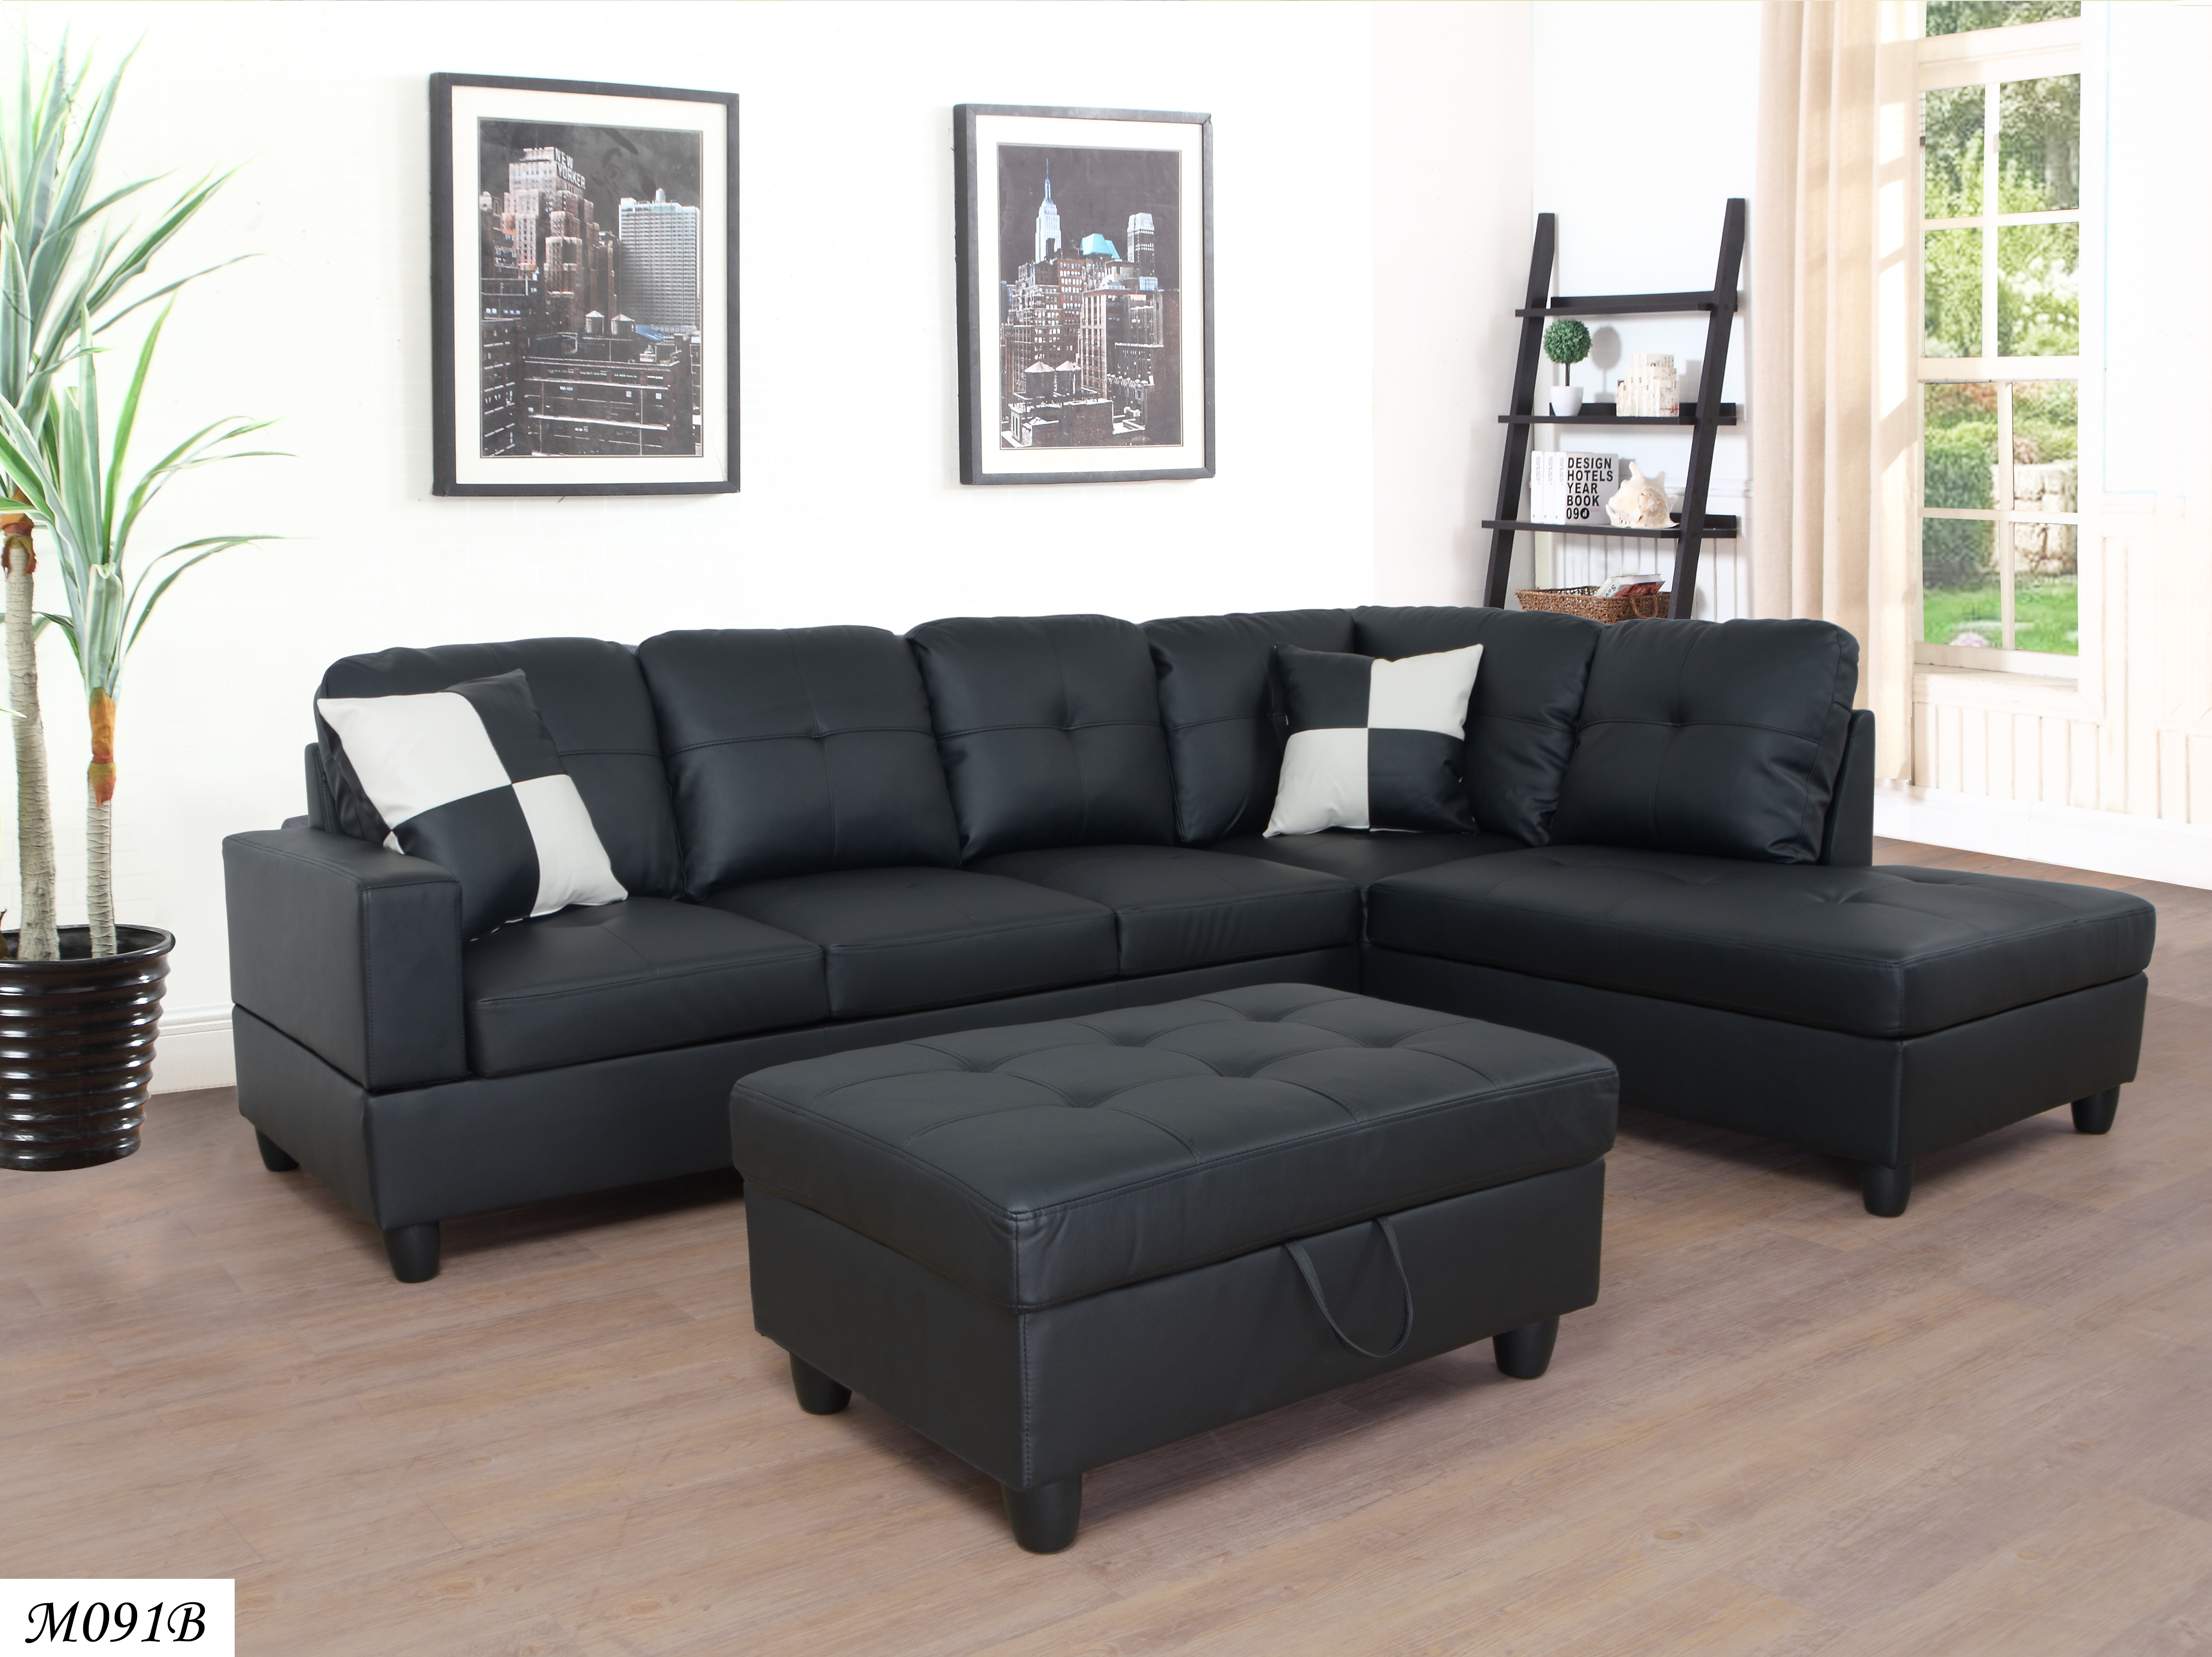 3 PC Sectional Sofa Set, (Black) Faux Leather Right -Facing Sofa with Free Storage Ottoman-Boyel Living